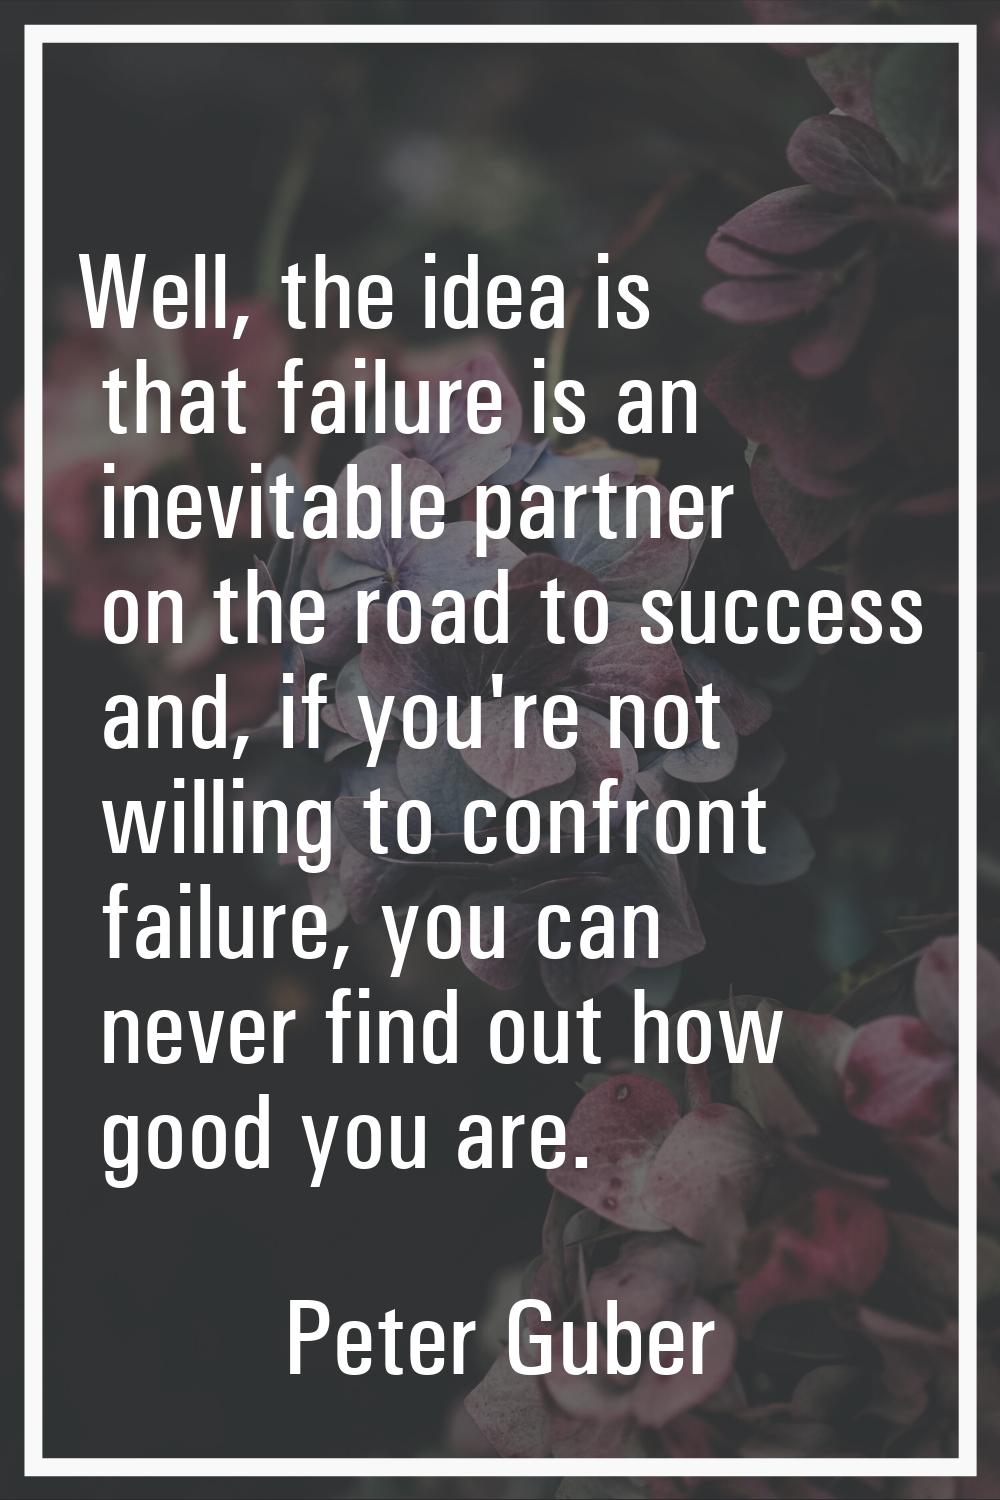 Well, the idea is that failure is an inevitable partner on the road to success and, if you're not w